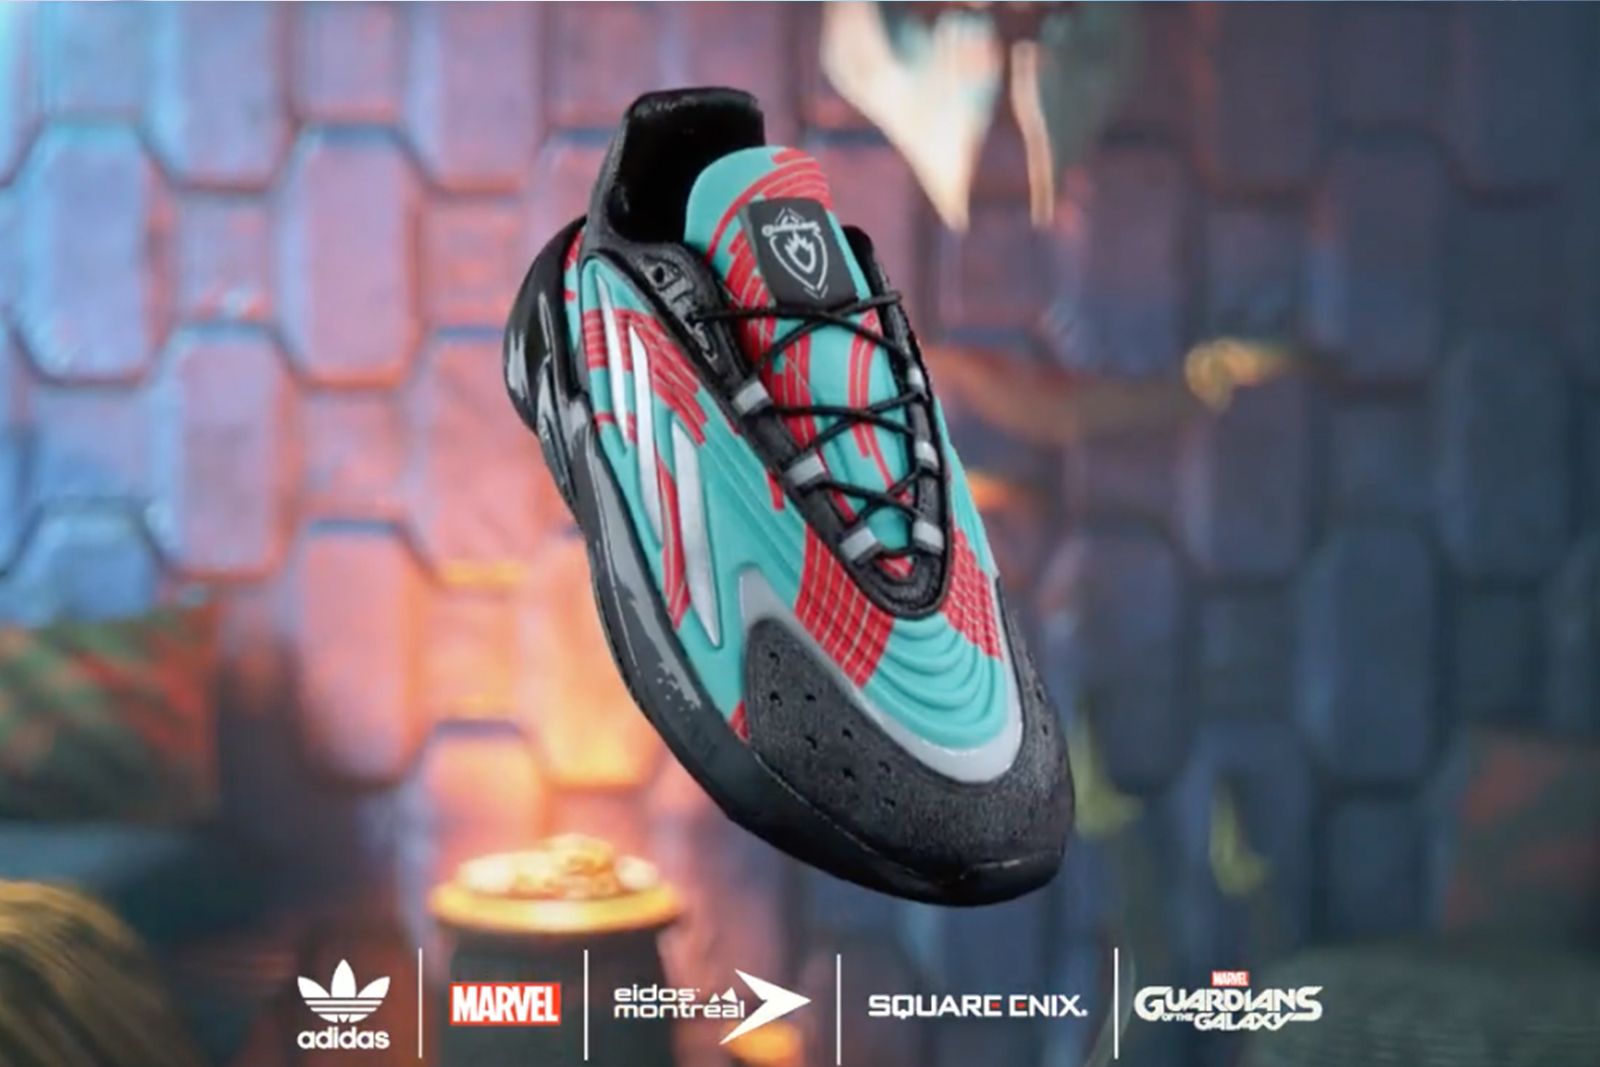 Adidas and Square Enix unveil Guardians of the Galaxy sneaker collection photo 6